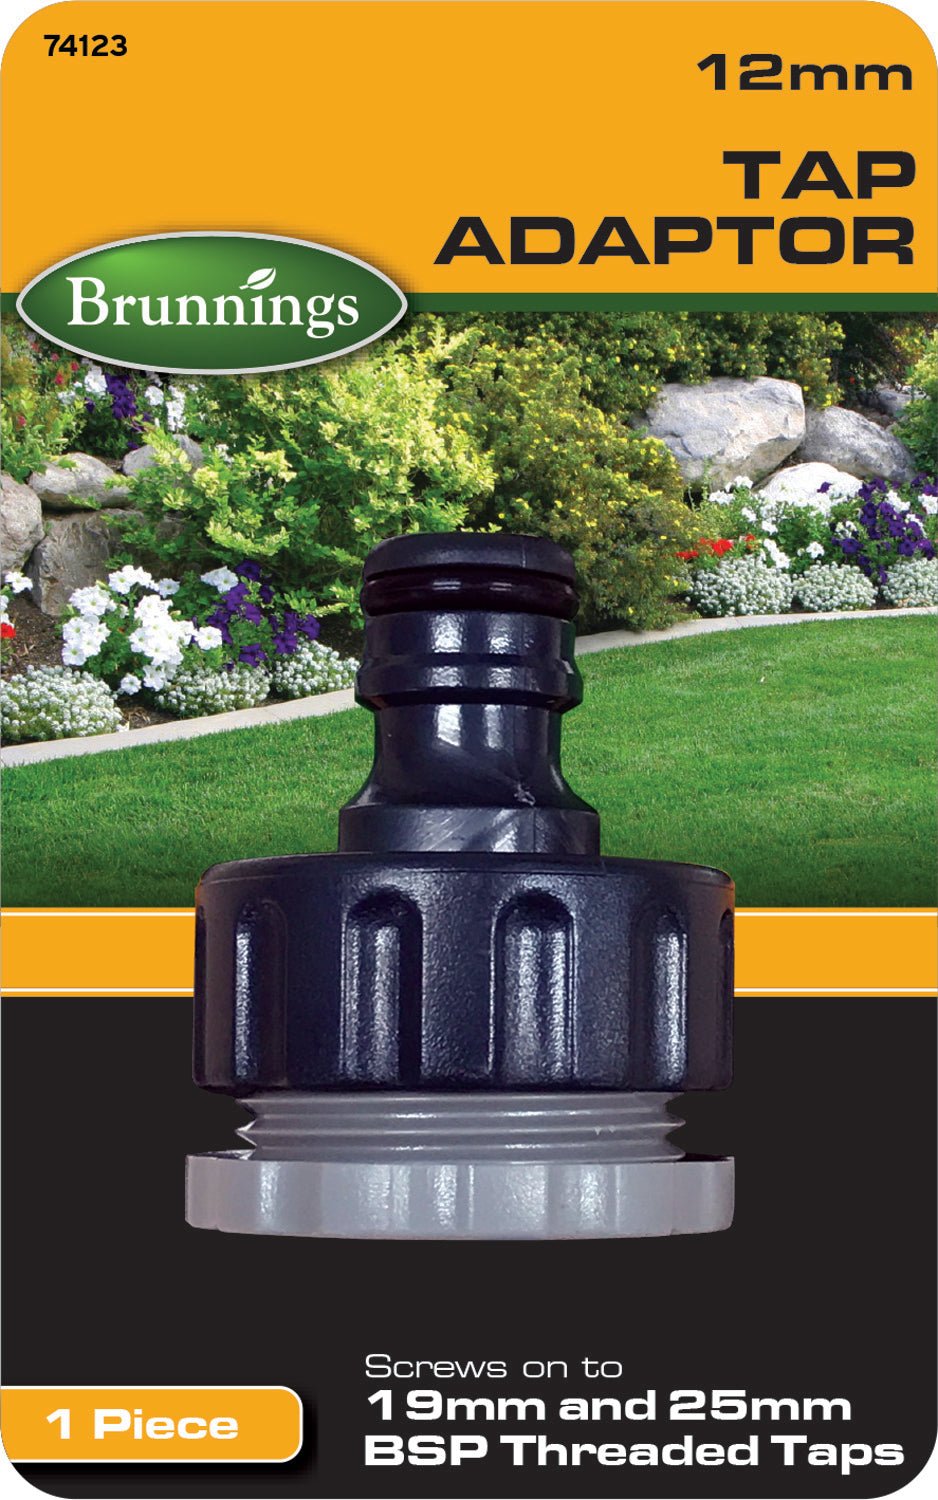 Brunnings Tap Adapter for 12mm Hose - Woonona Petfood & Produce